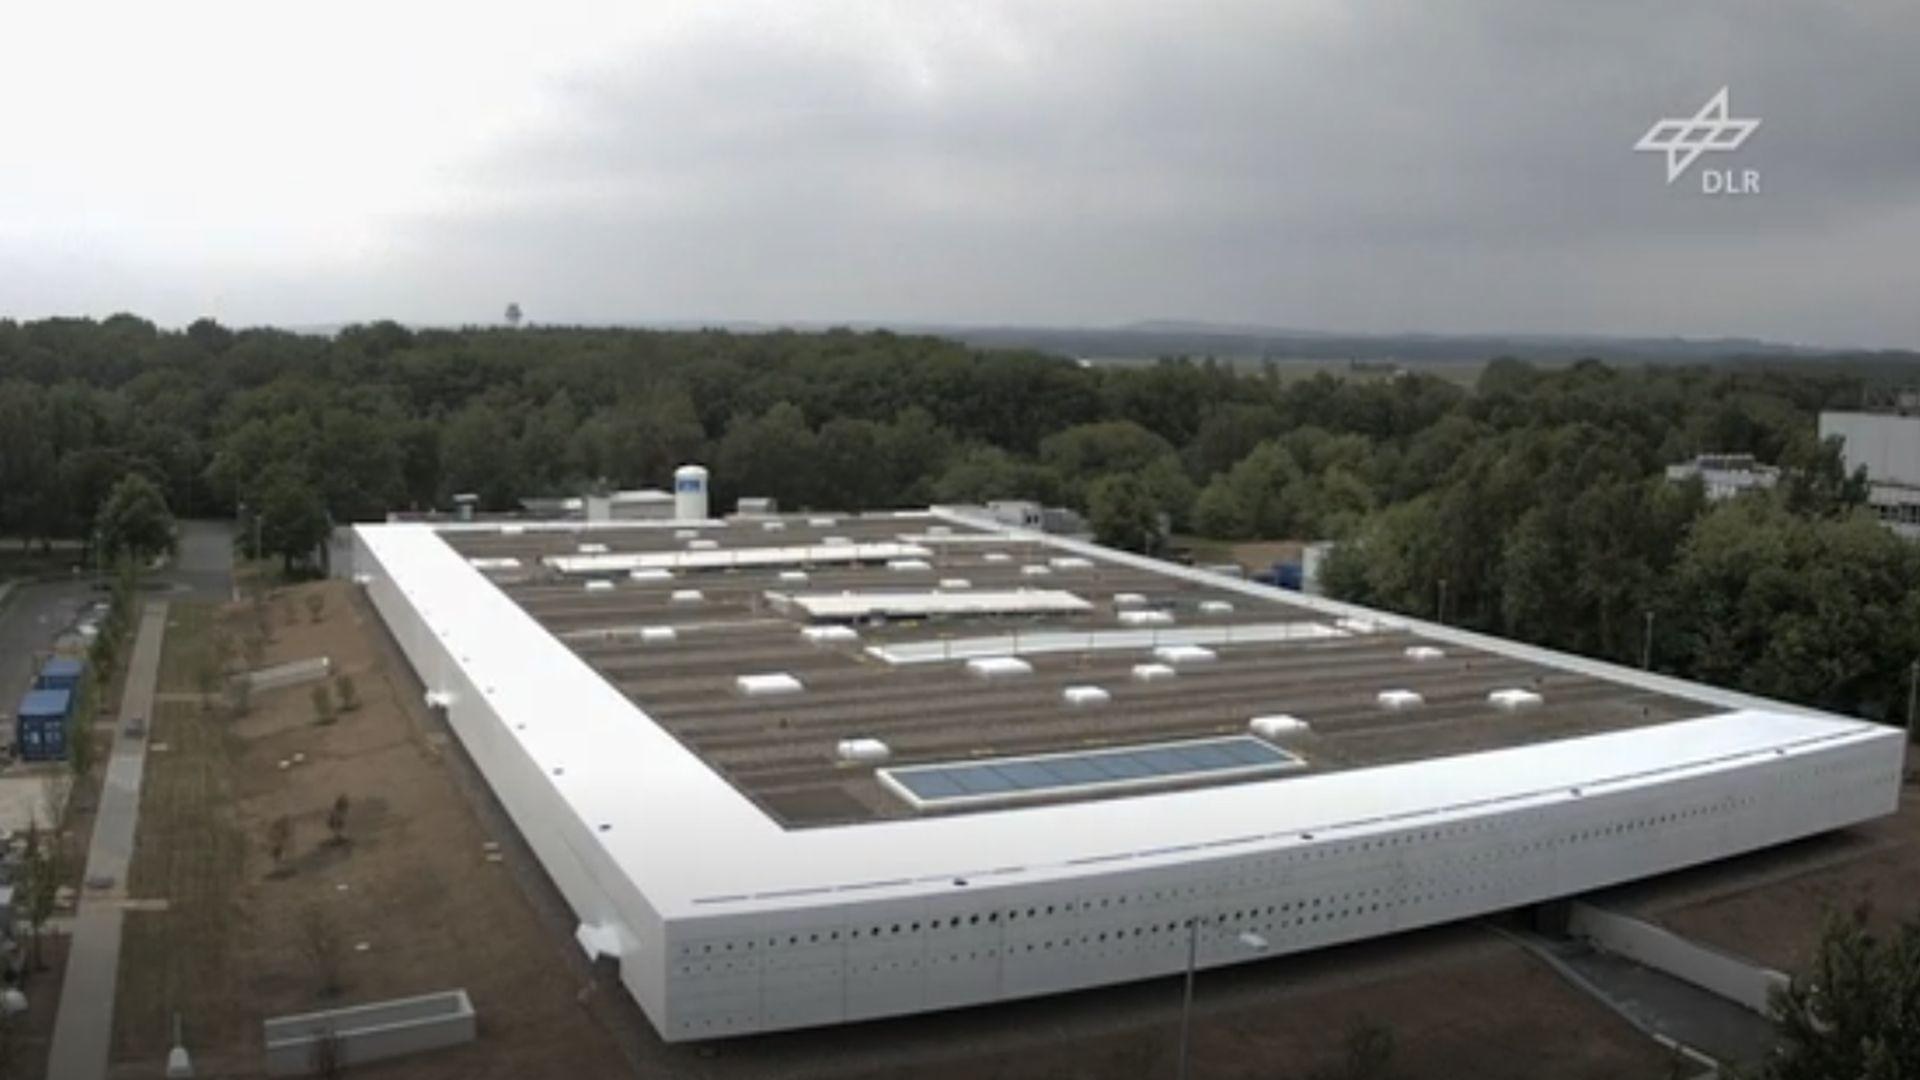 Still video: Time lapse video building the globally unique :envihab research facility